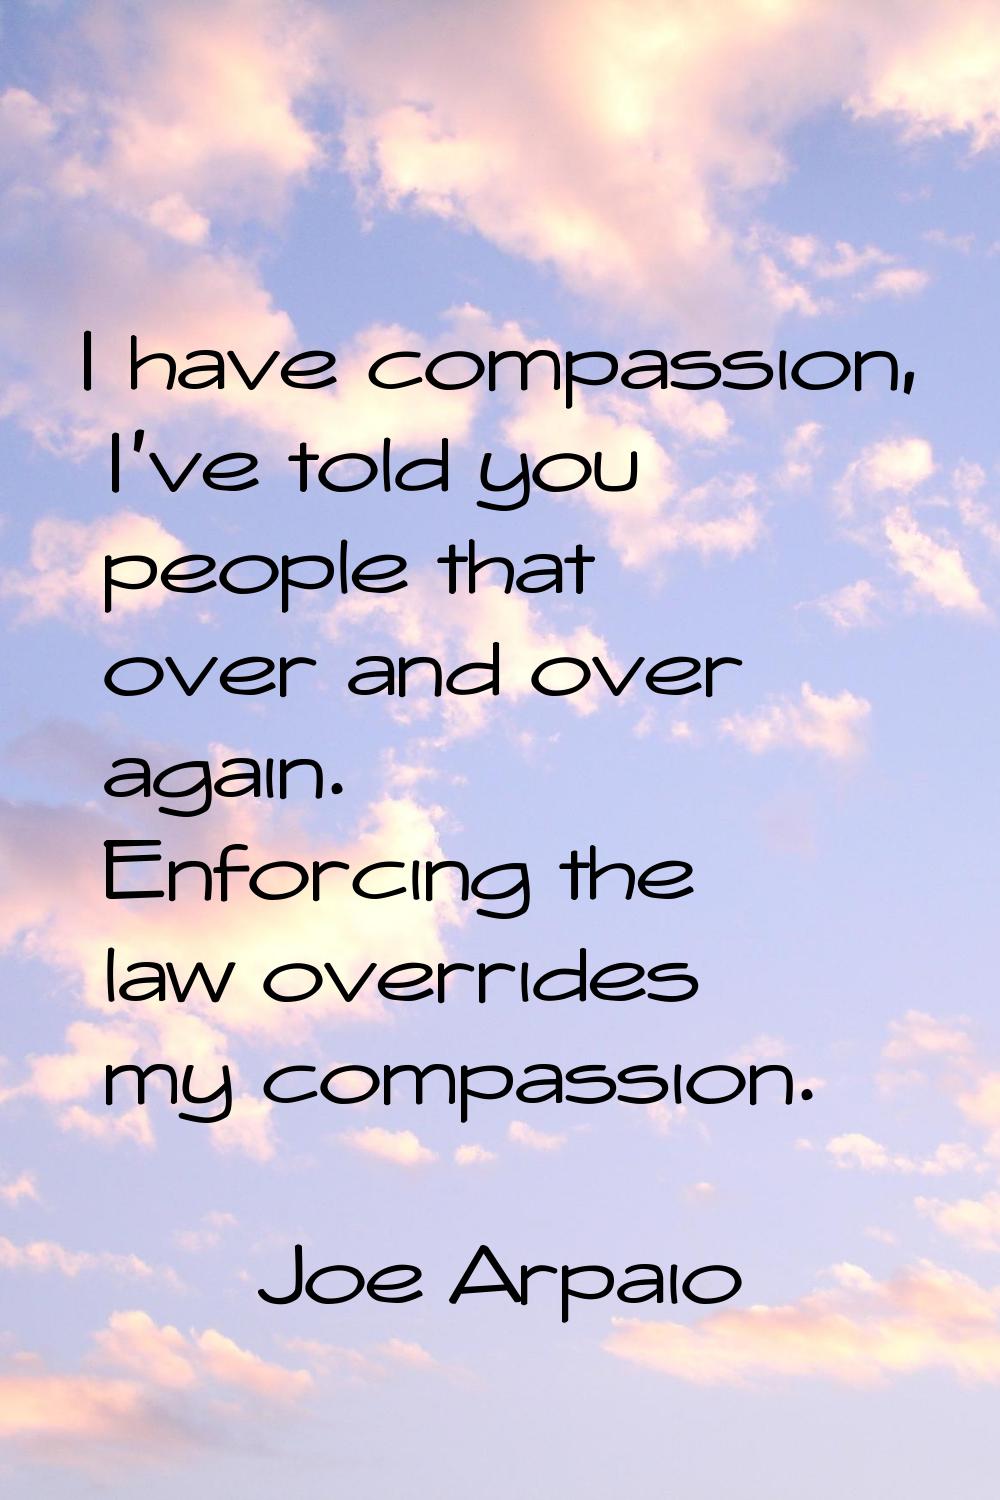 I have compassion, I've told you people that over and over again. Enforcing the law overrides my co